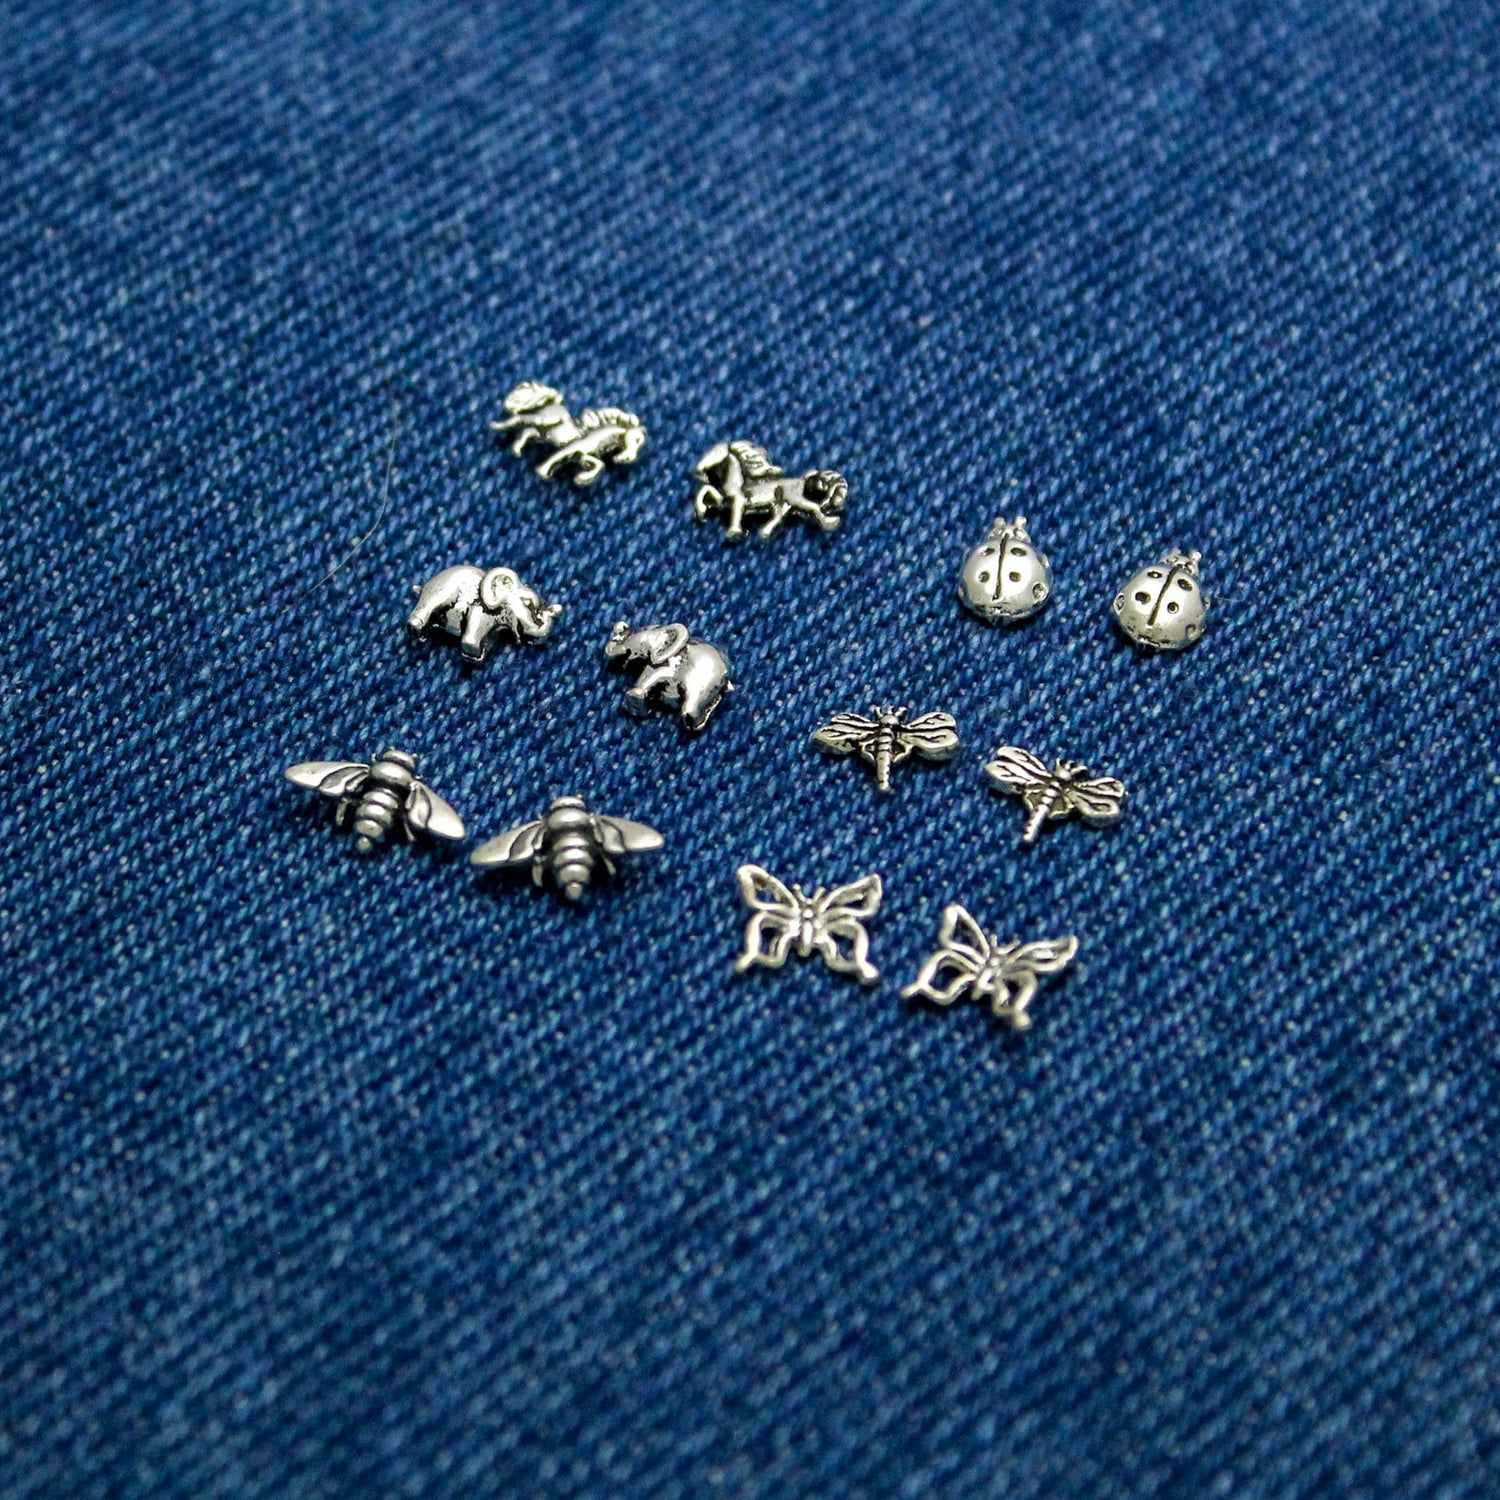 Cute Animal & Insect Studs in Sterling Silver Bumblebee, Lady Bugs, Butterfly, Horses, Elephants and Dragonfly, Minimalist Stud Earrings